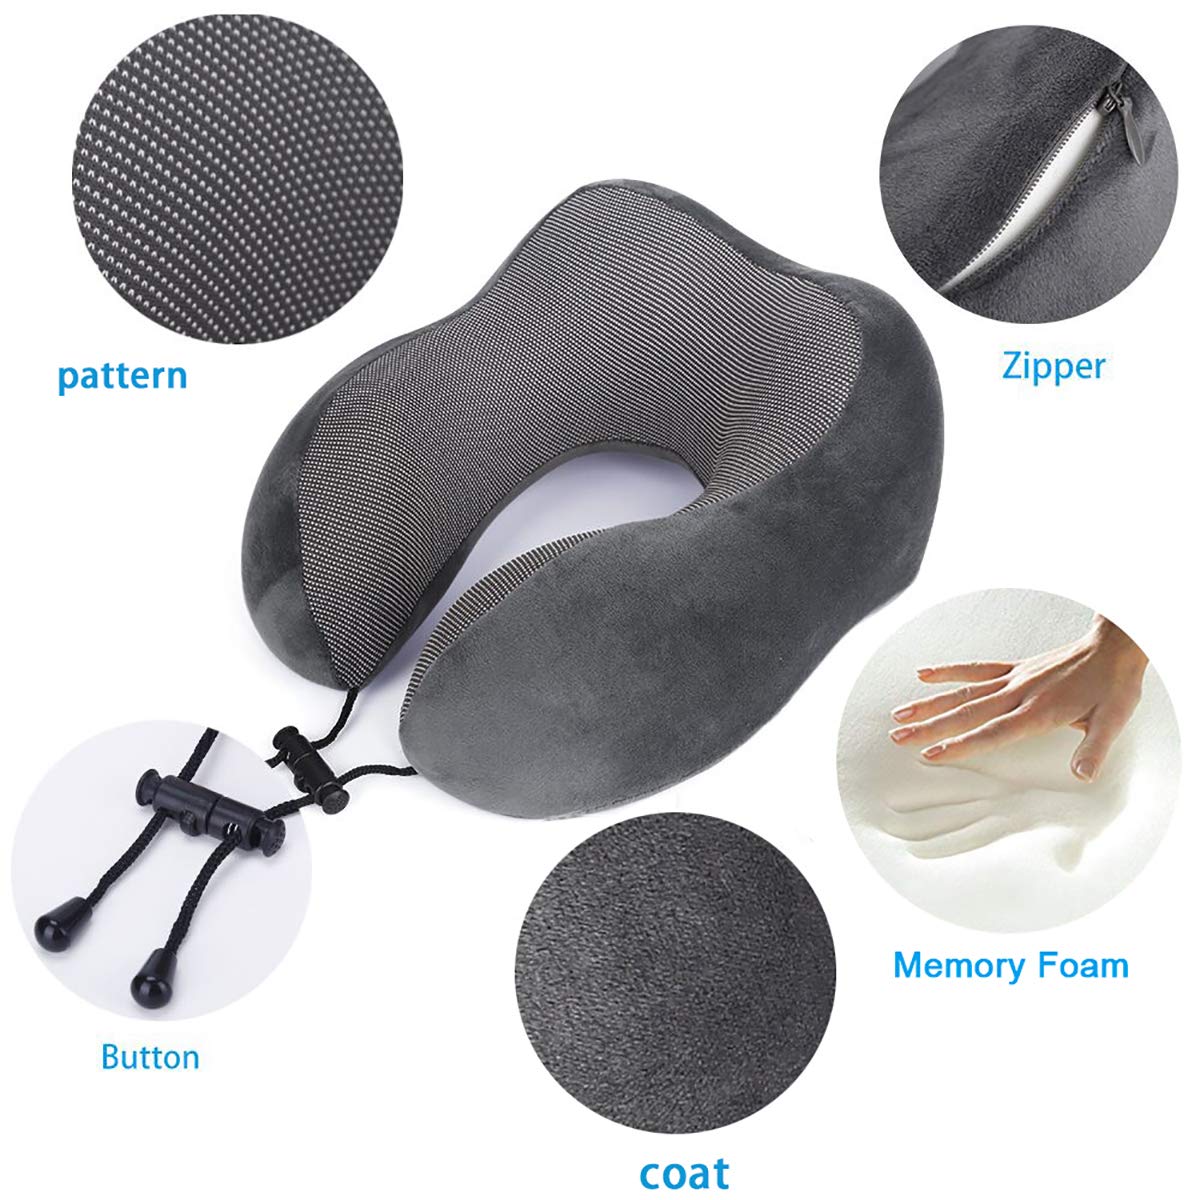 Travel Pillow, Best Memory Foam Neck Pillow Head Support Soft Pillow for Sleeping Rest, Airplane Car & Home Use (Grey)